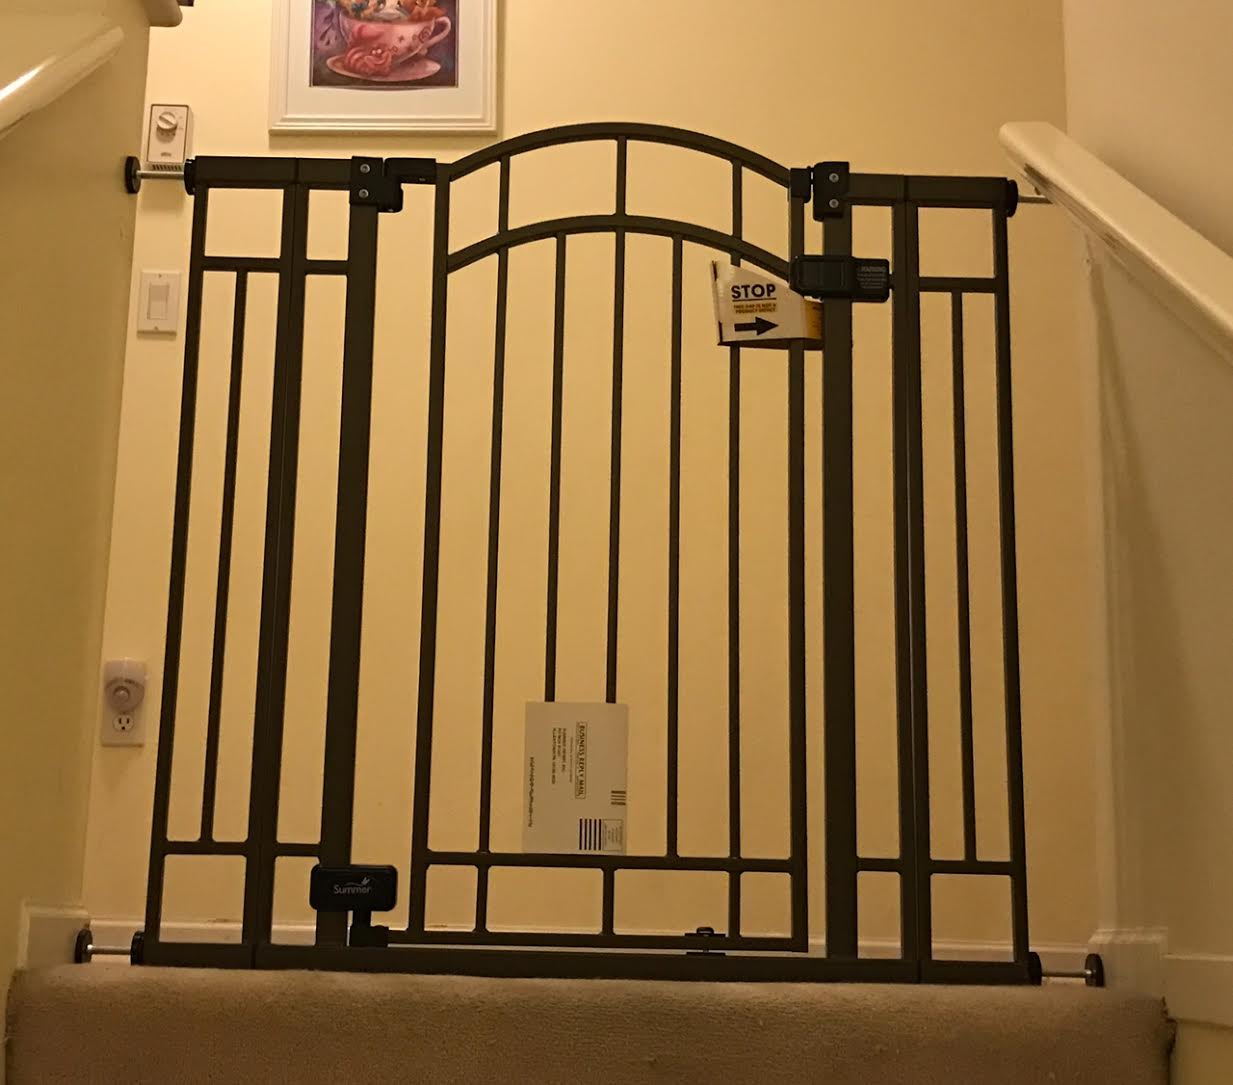 summer infant extra tall baby gate